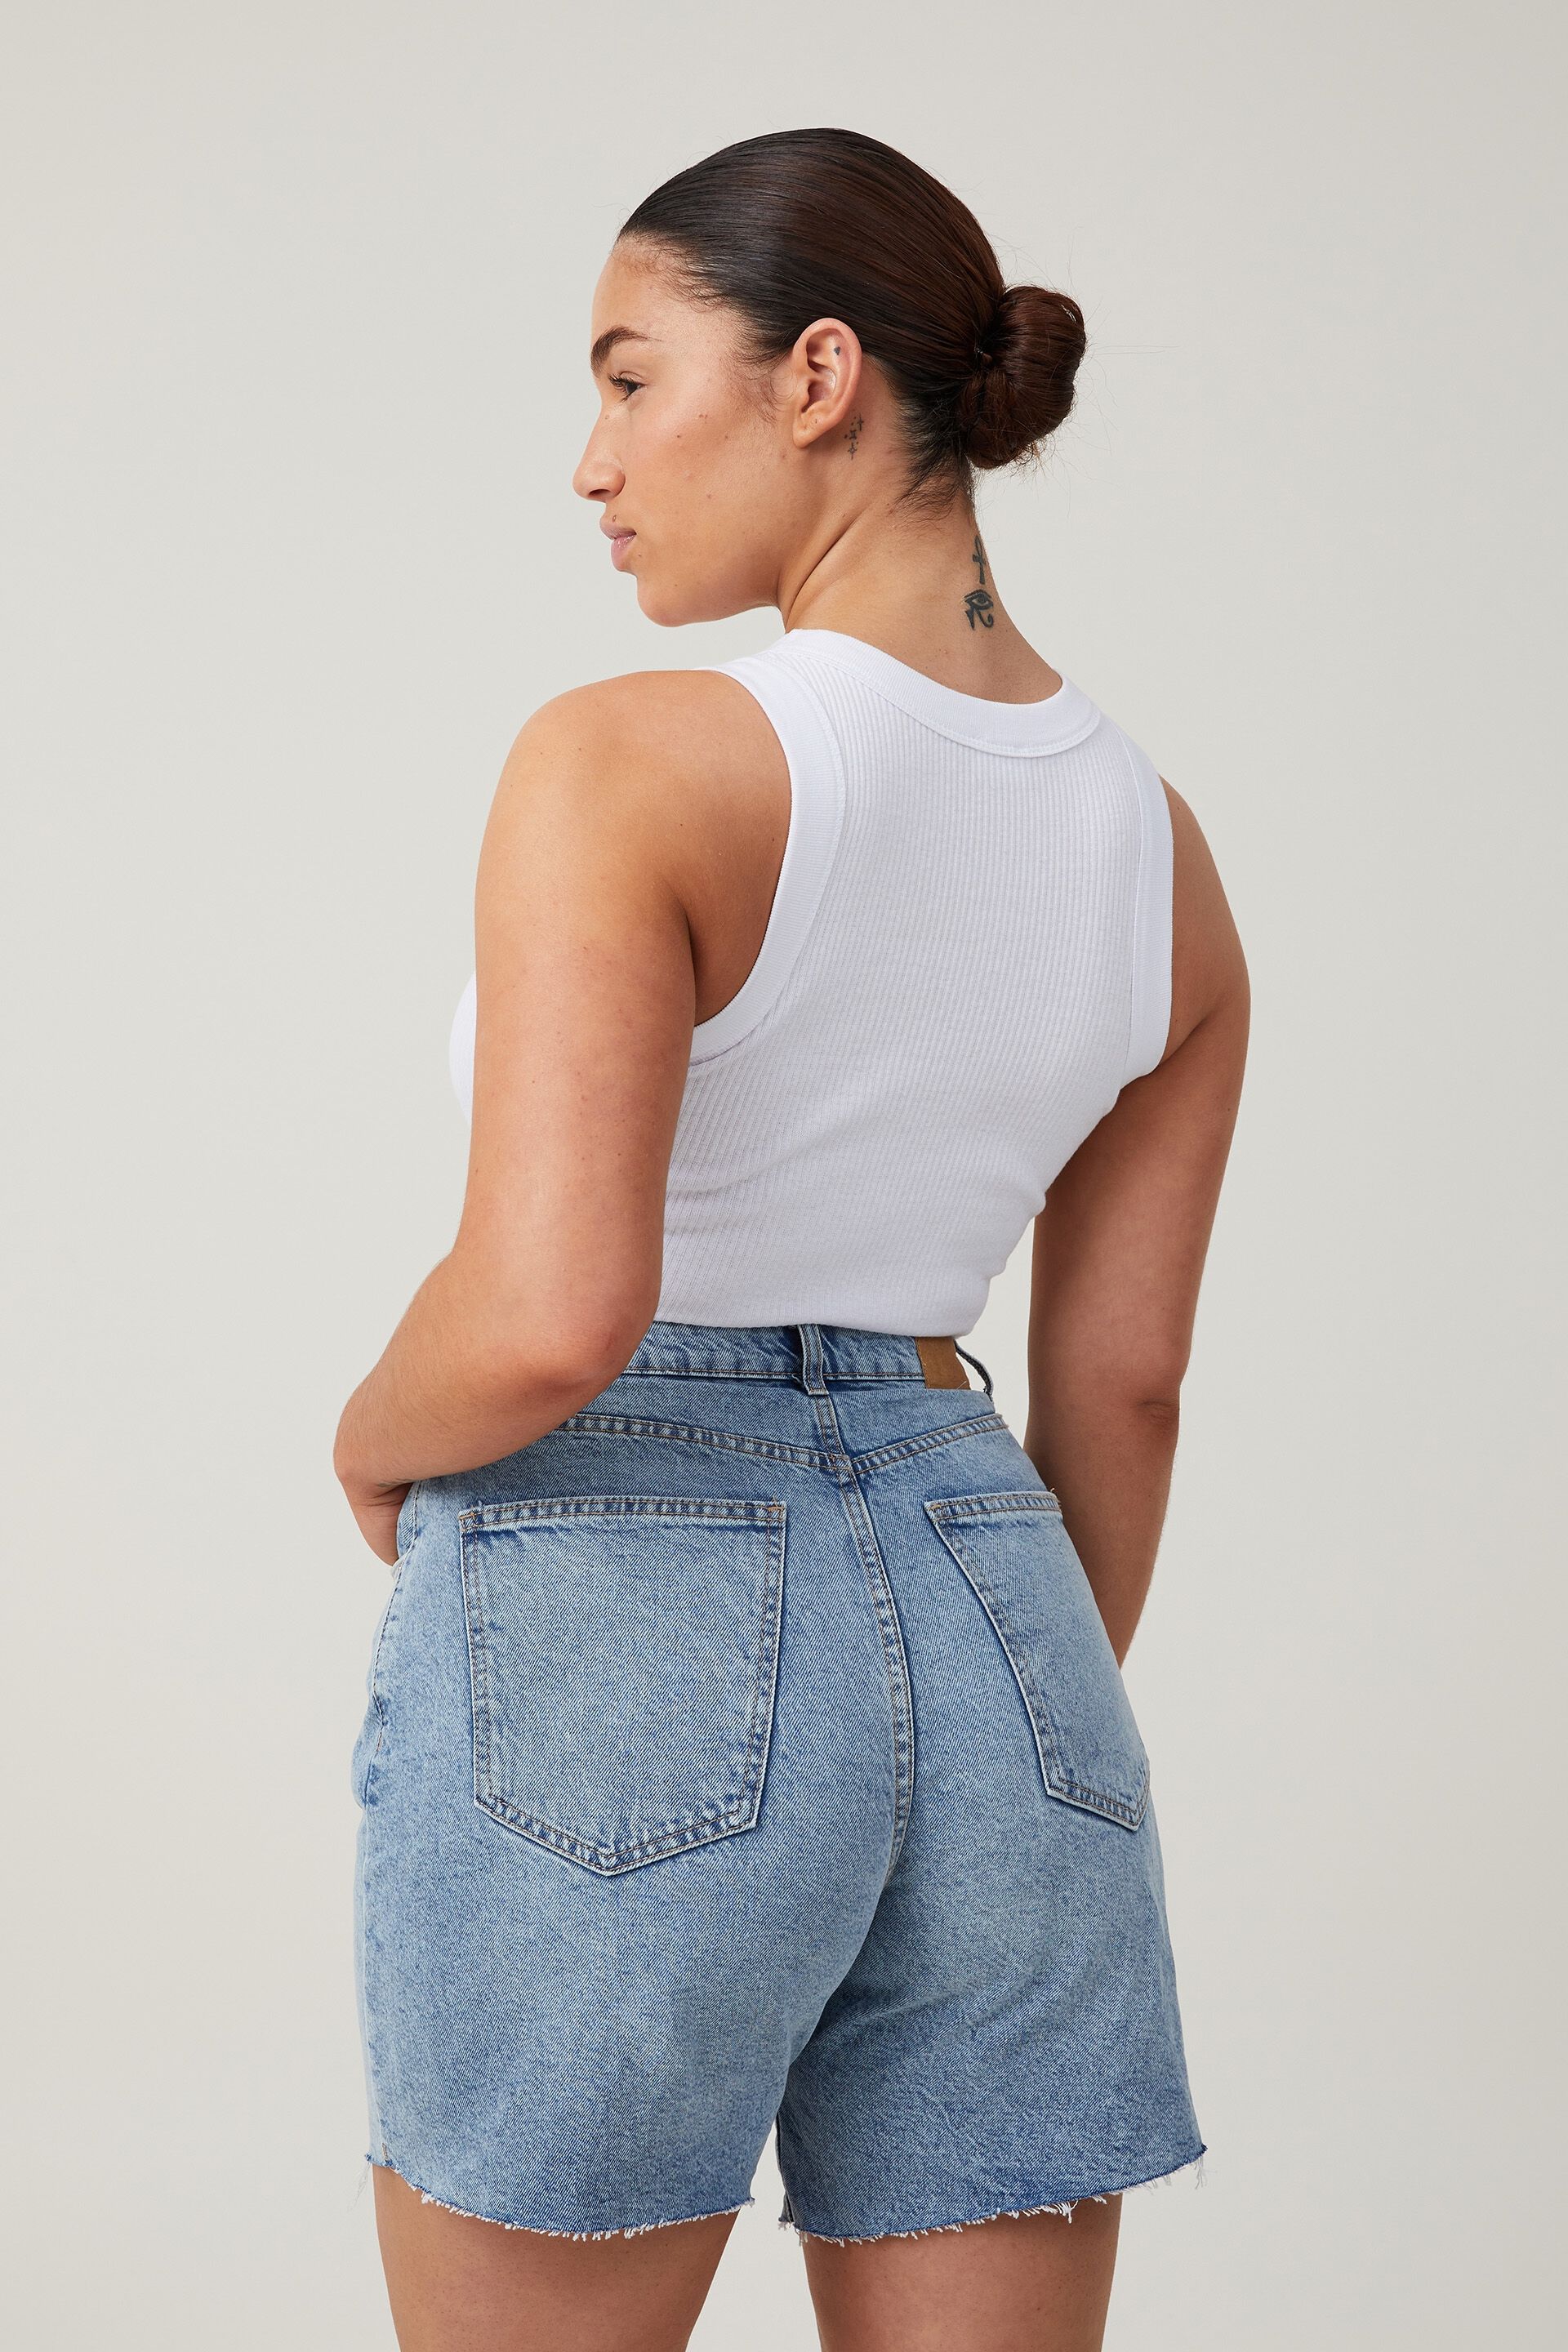 Aéropostale Curvy Seriously Stretchy High-Waisted Uniform Bermuda Shorts |  CoolSprings Galleria